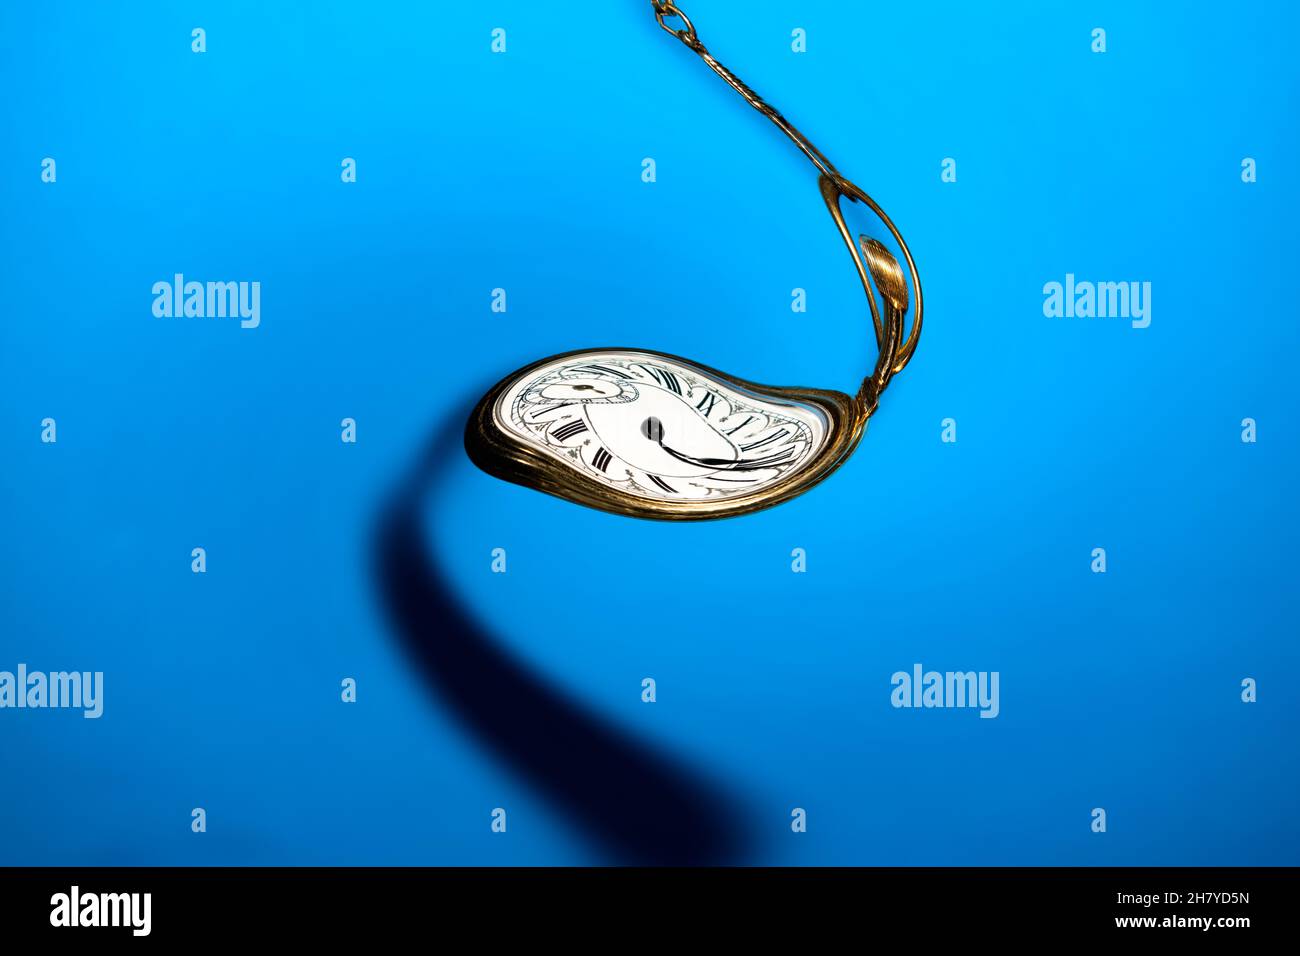 Warped, Spiraling Clock face on blue background Stock Photo